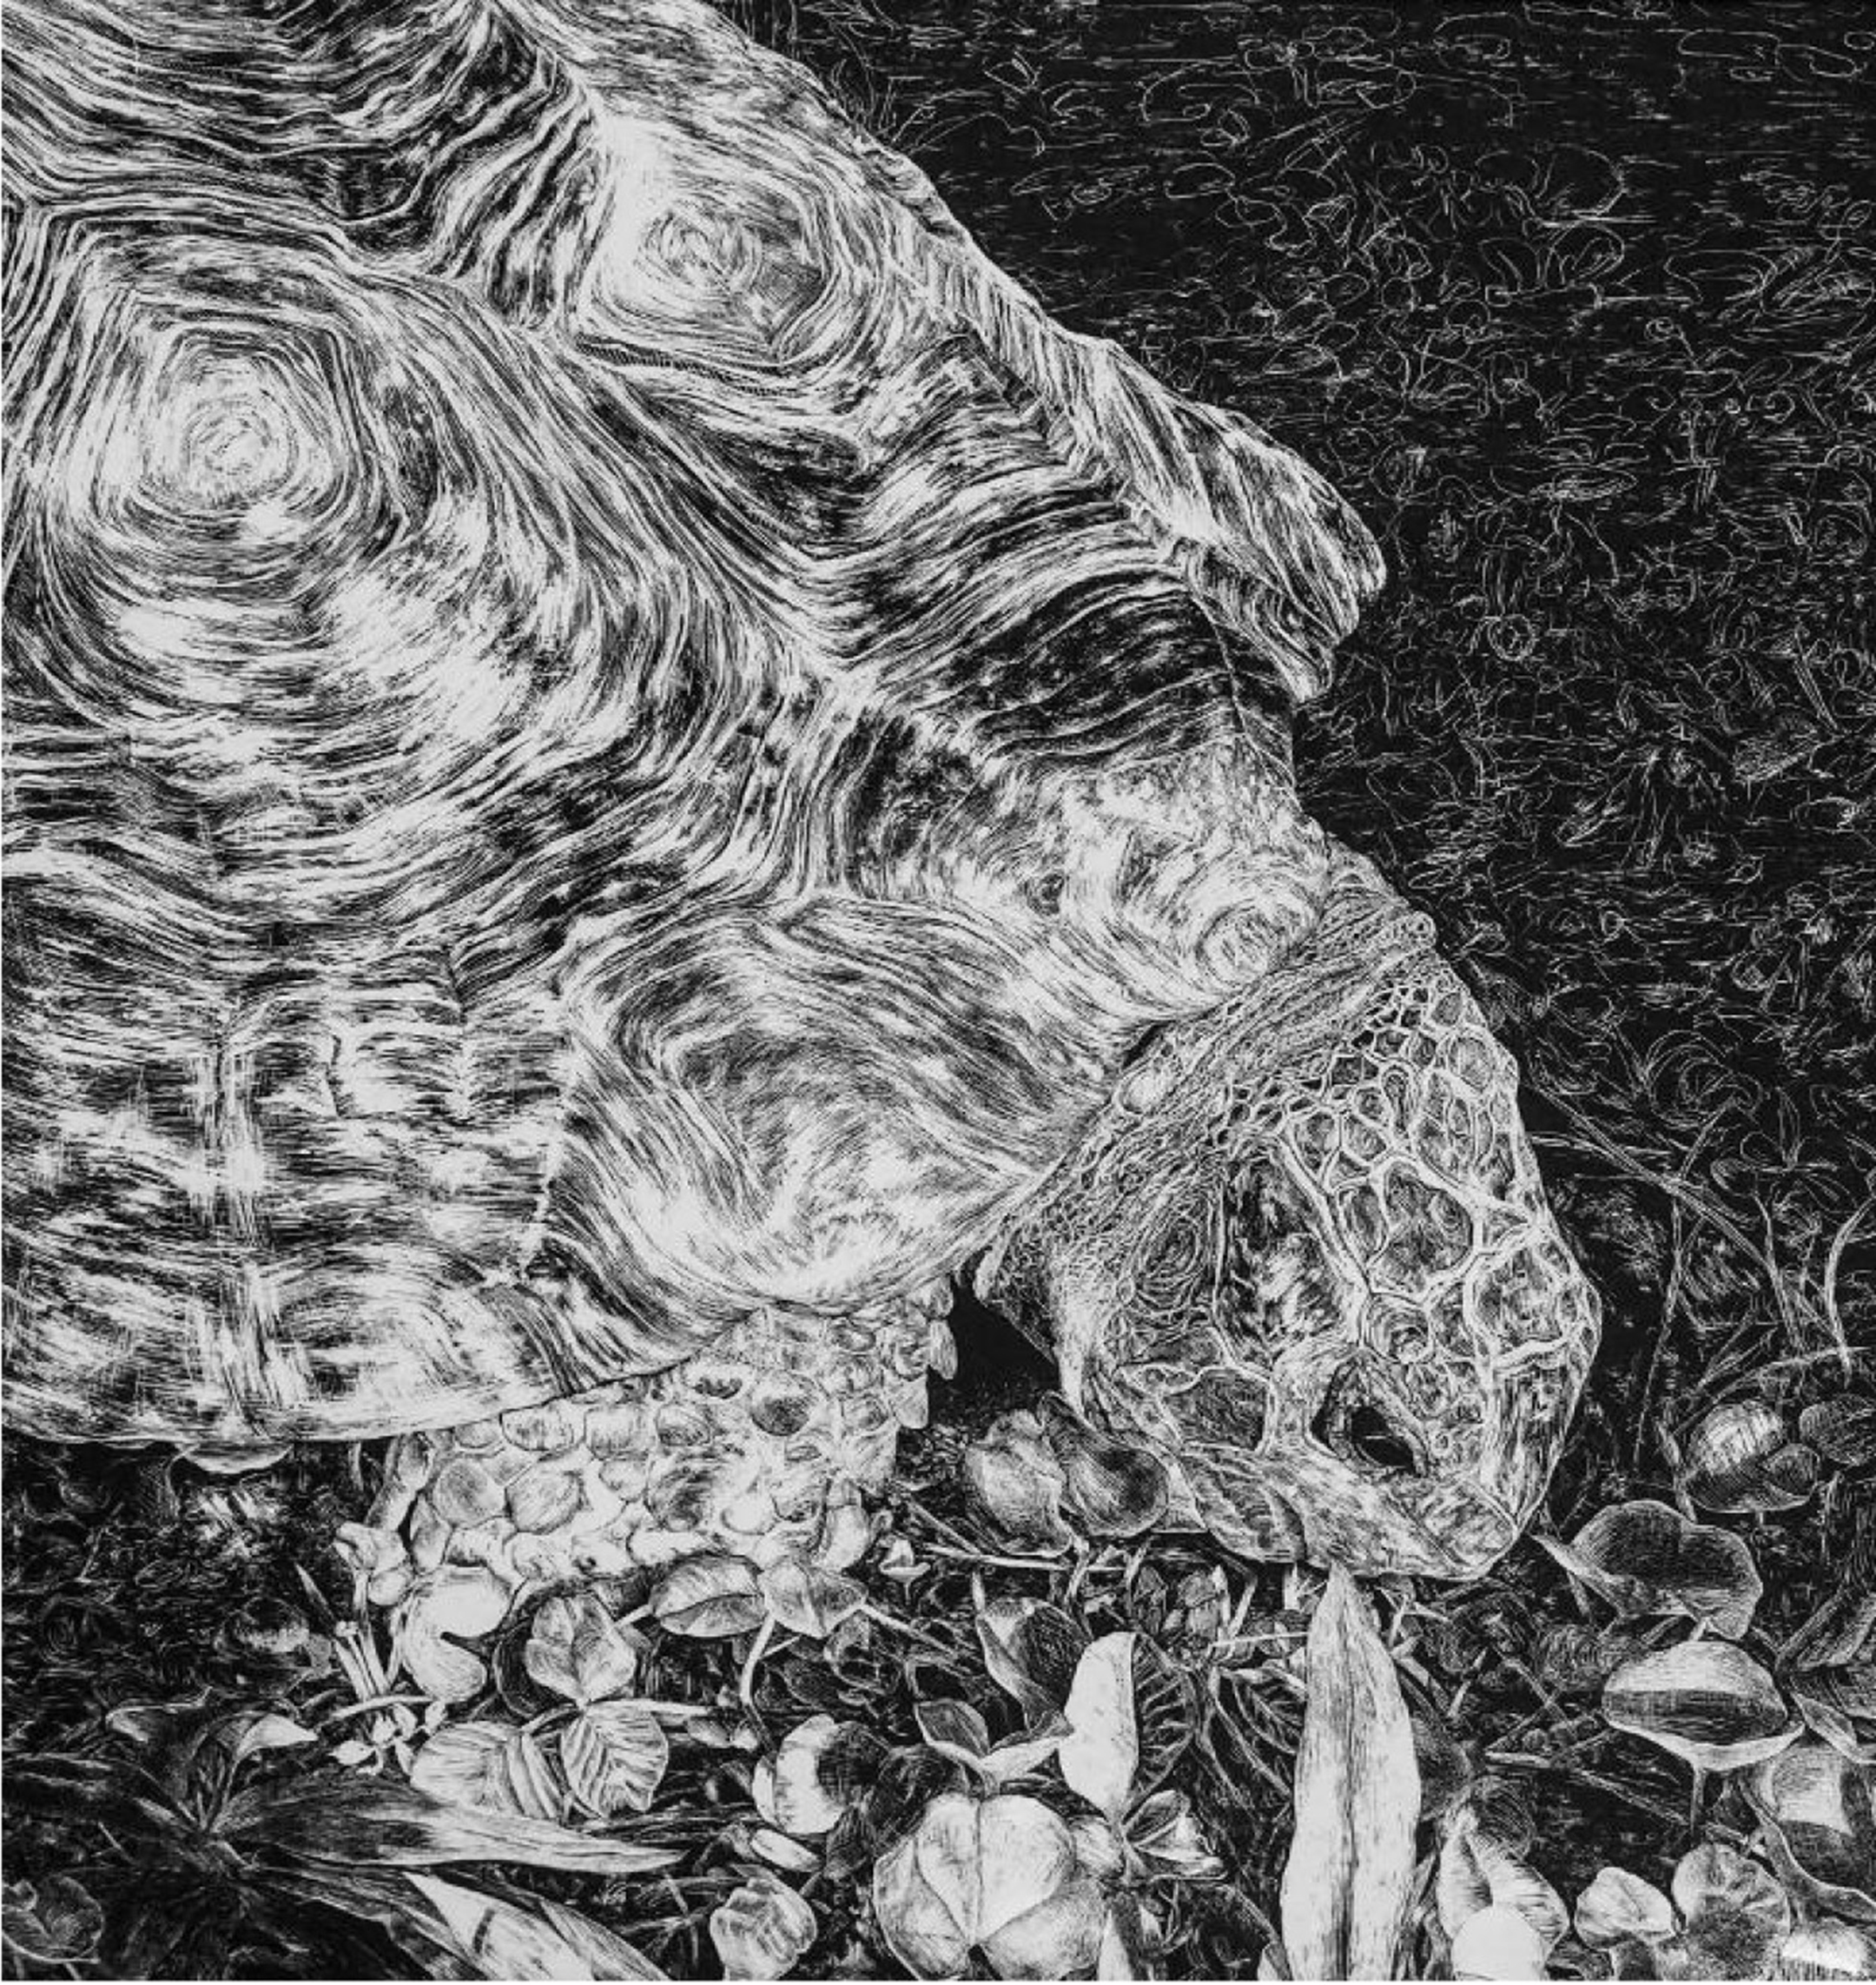 Abstract black and white illustration of a turtle